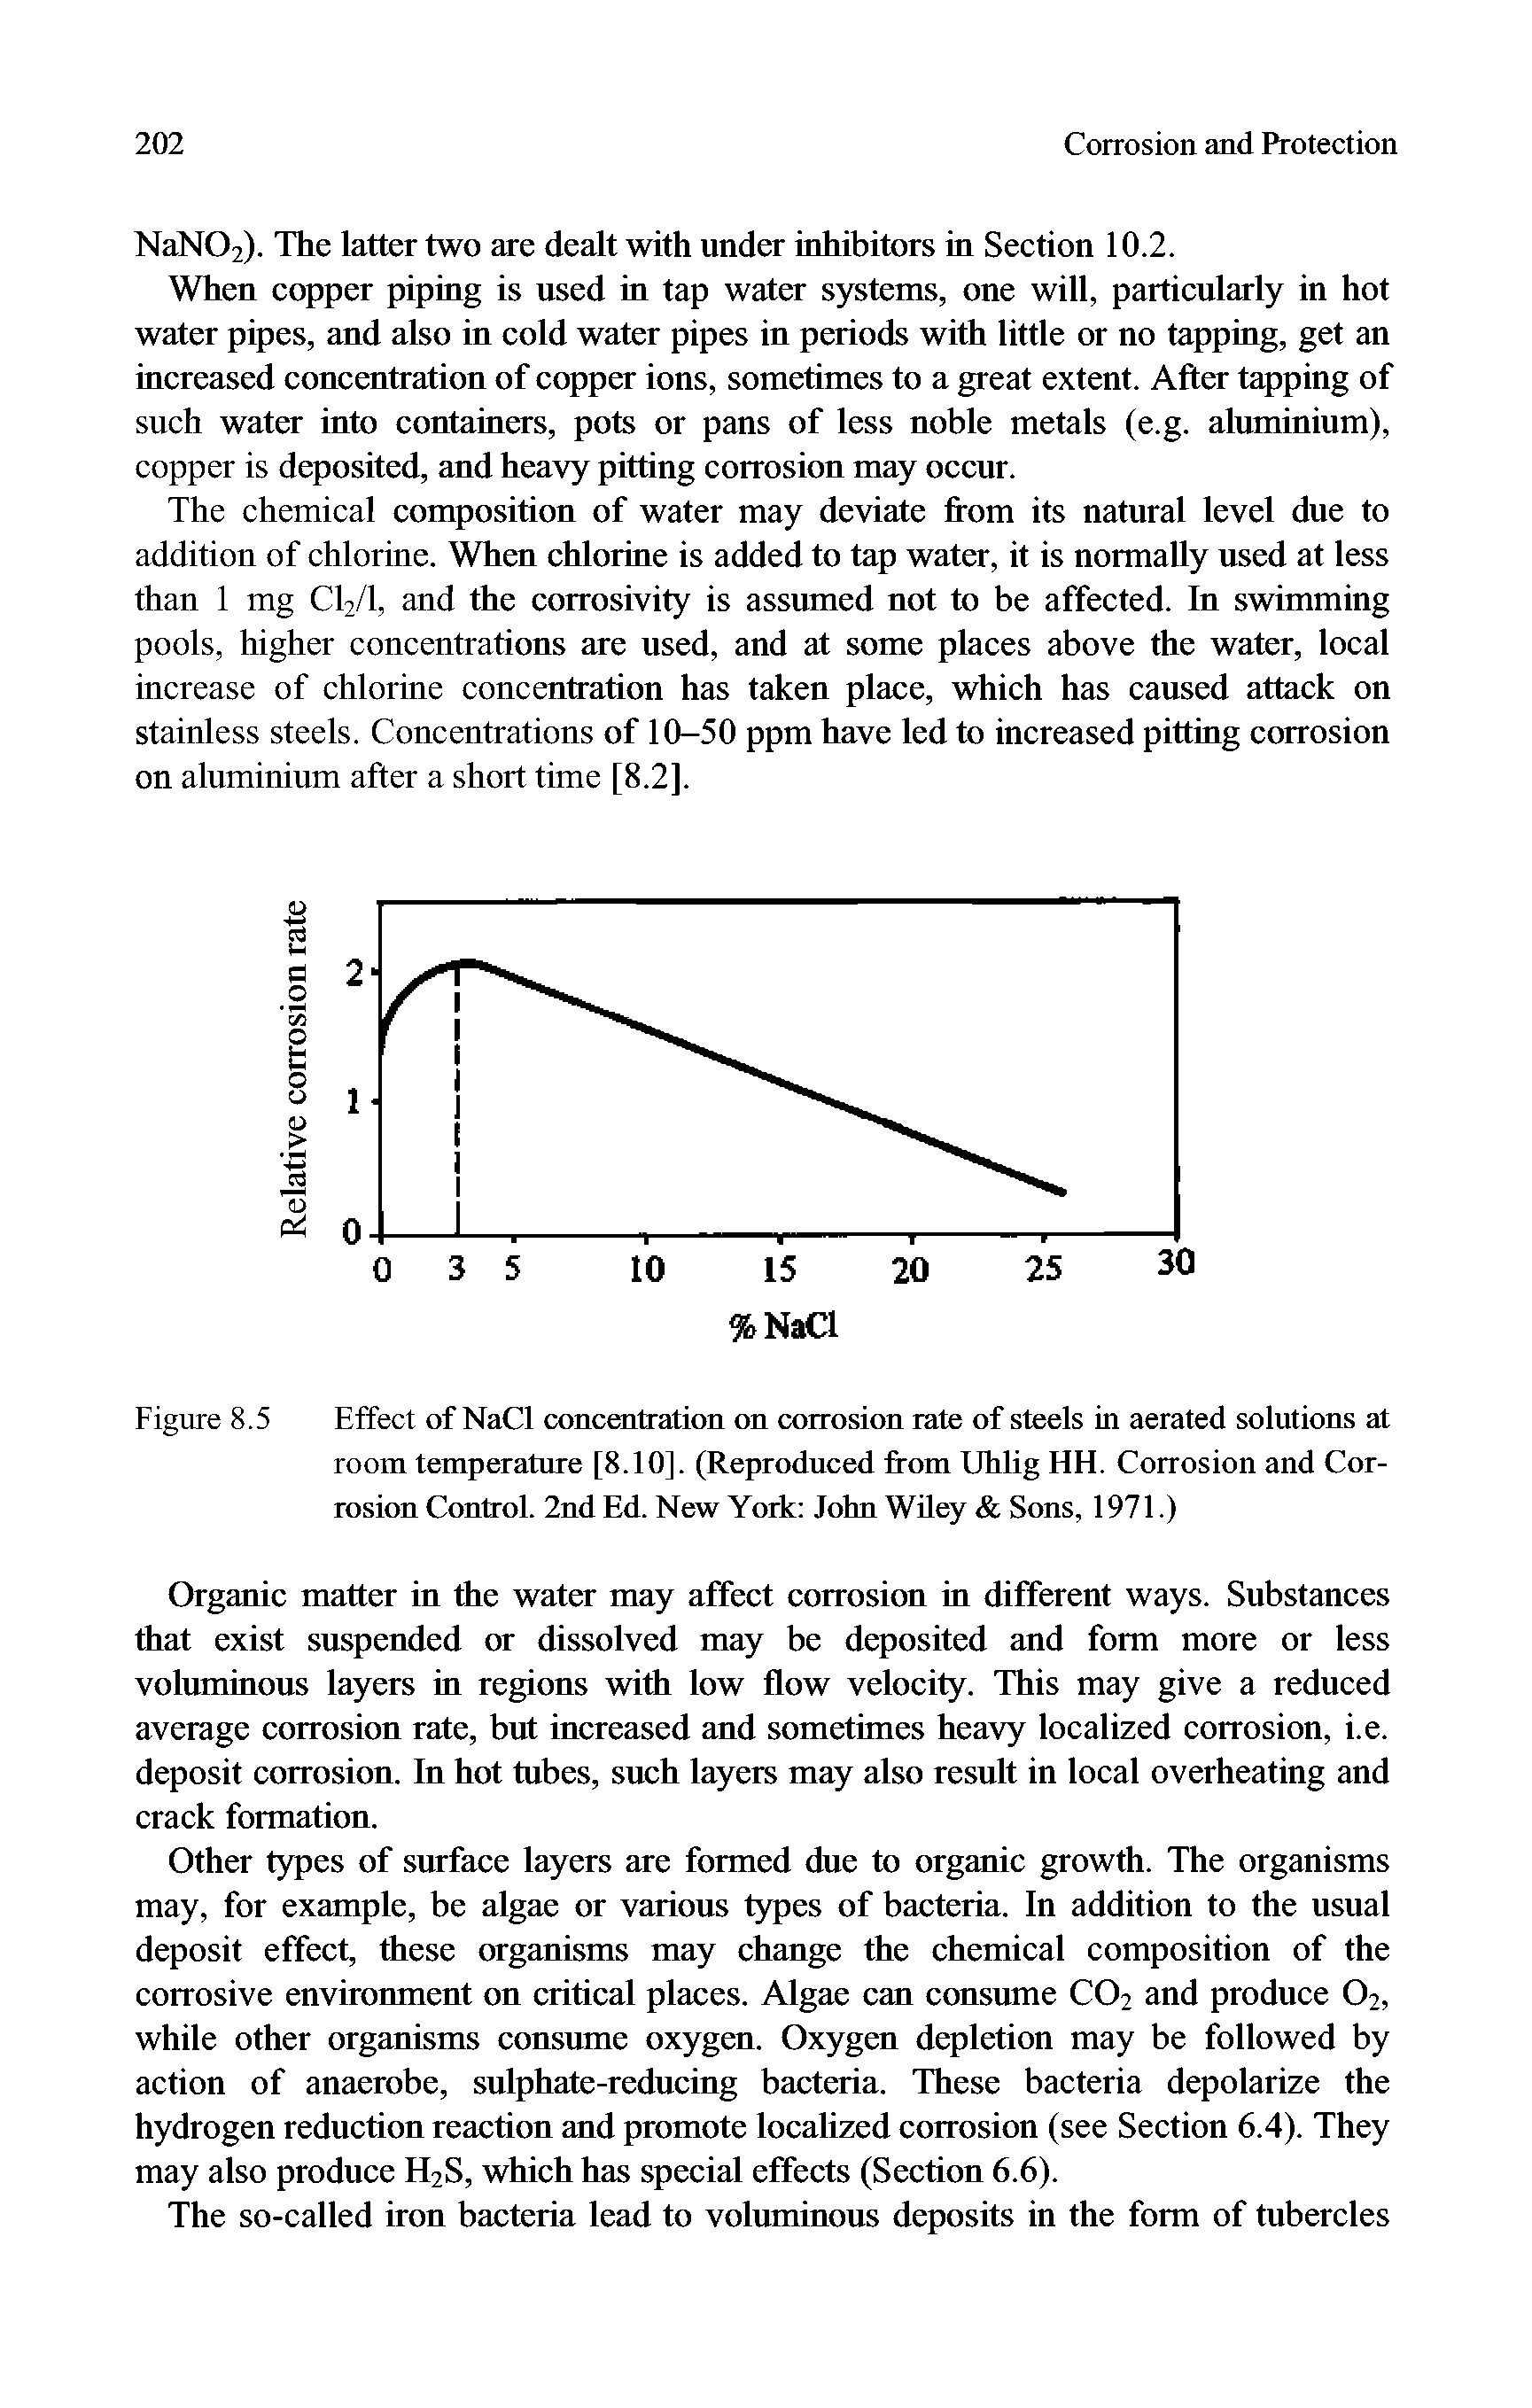 Figure 8.5 Effect of NaCl concentration on corrosion rate of steels in aerated solutions at room temperature [8.10]. (Reproduced from Uhlig HH. Corrosion and Corrosion Control. 2nd Ed. New York John Wiley Sons, 1971.)...